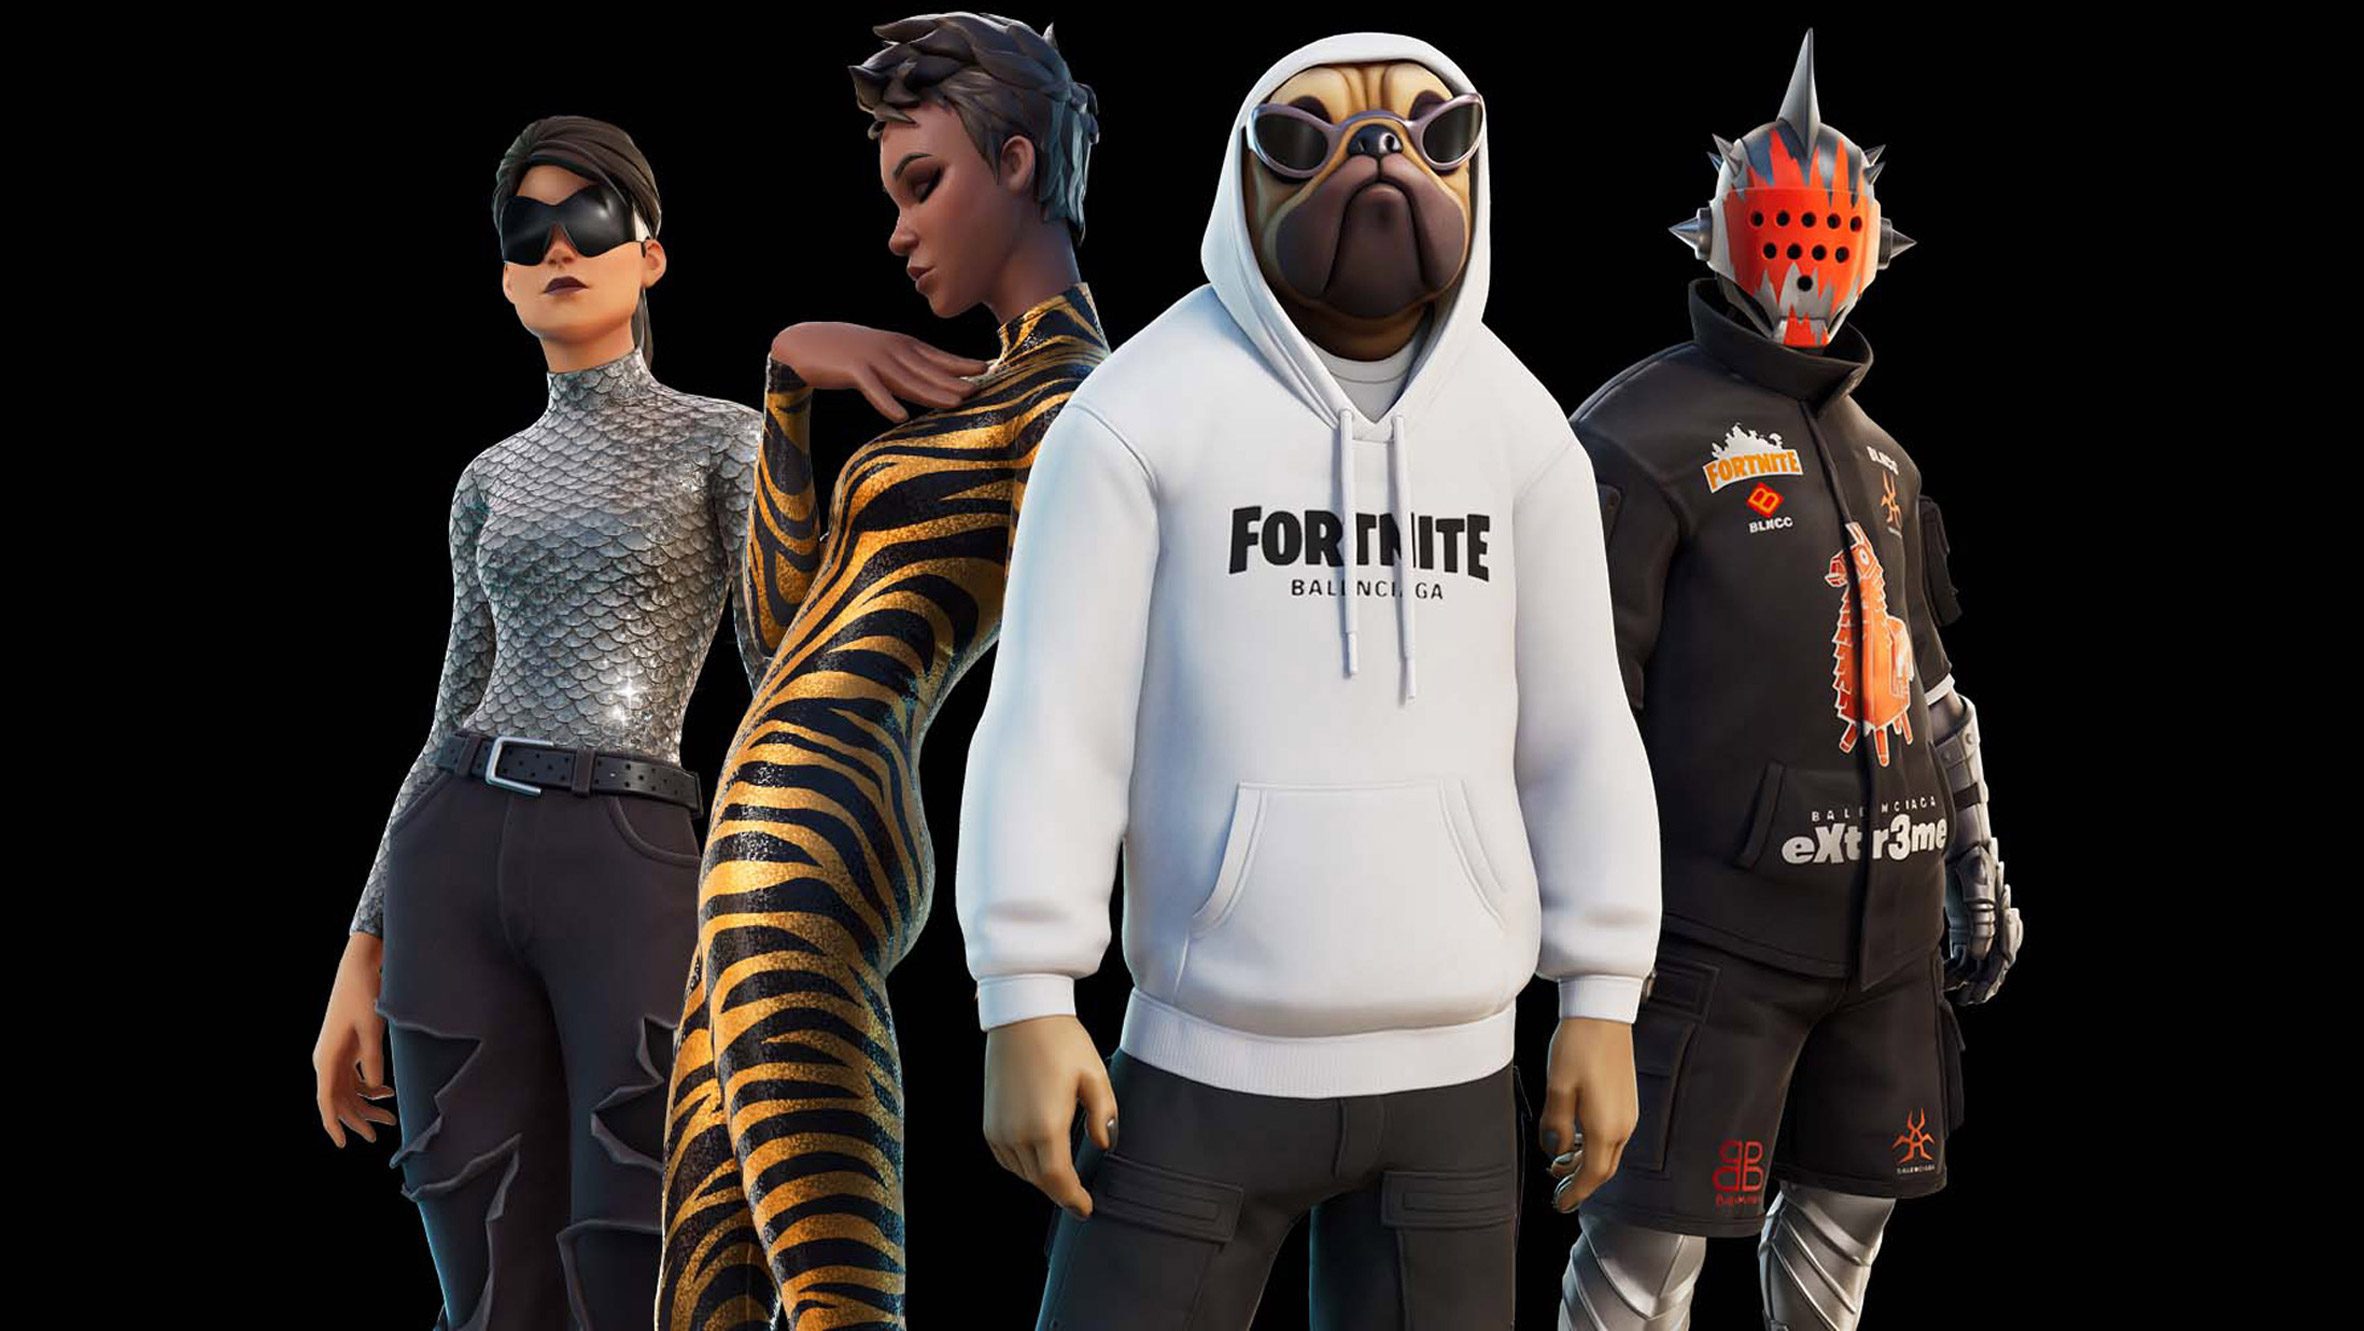 FORTNITE (Official): Outfits 2: The Collectors' Edition: Epic